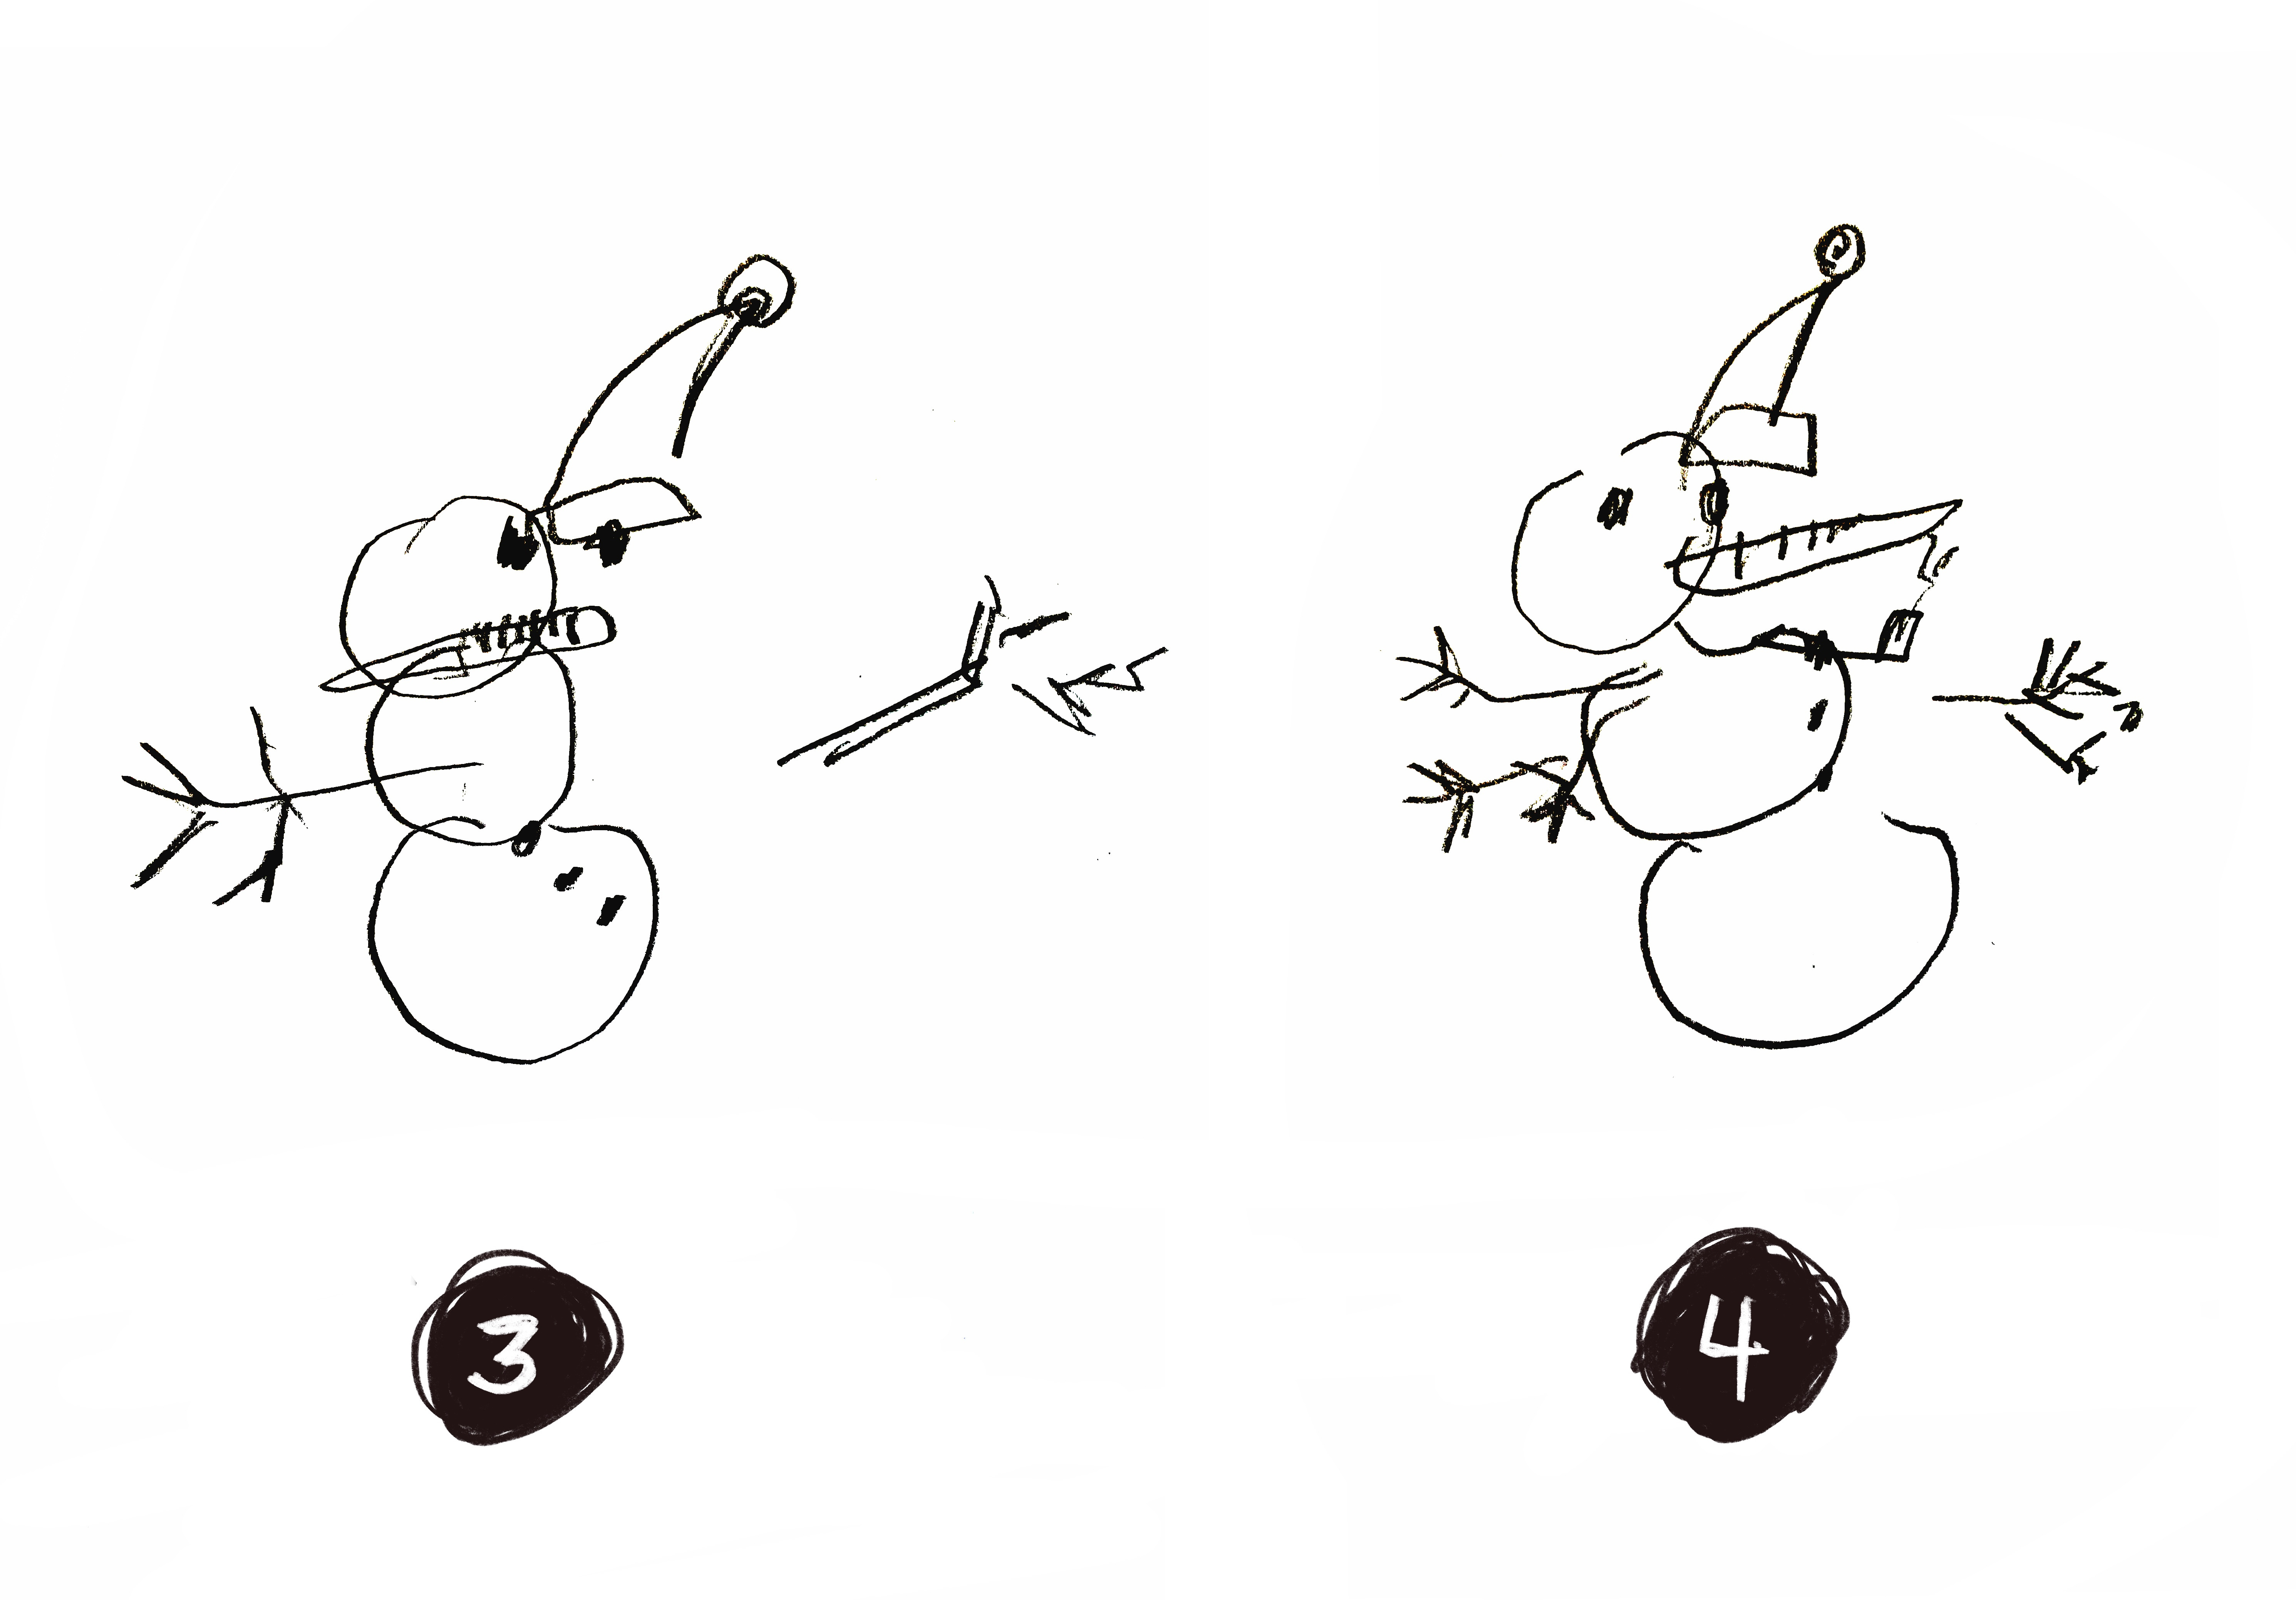 25 Clever Drawing Games To Level-Up Artistic Skills